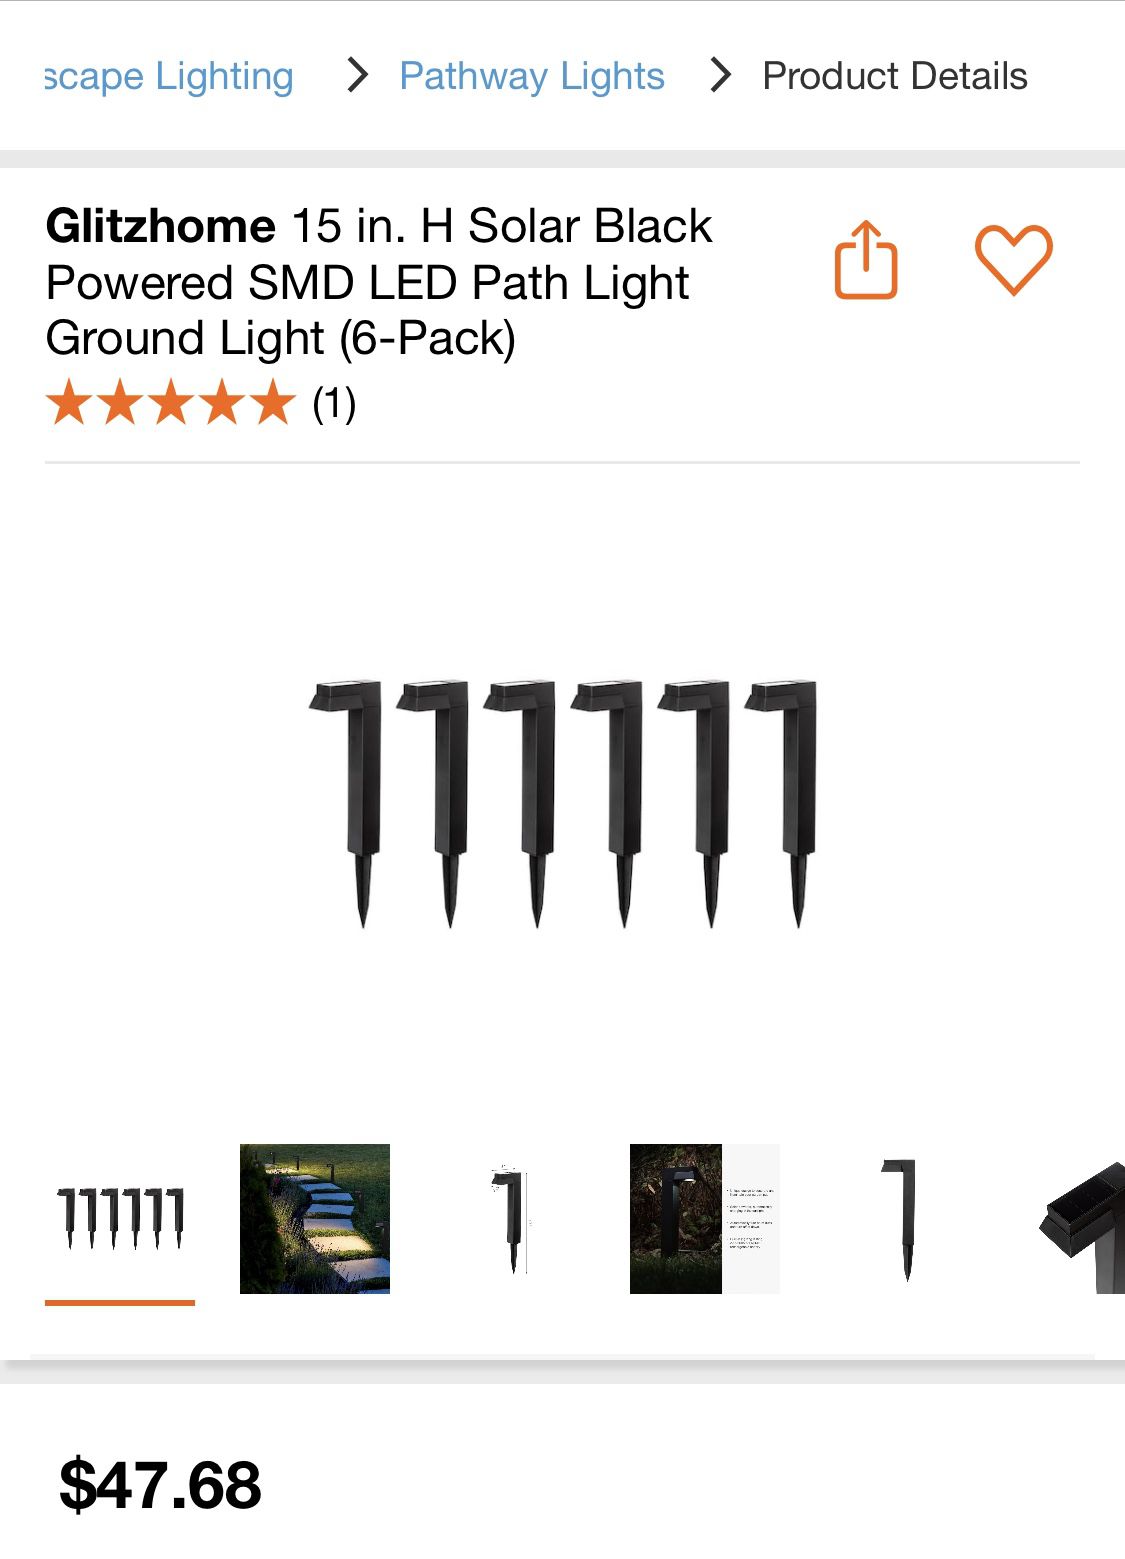 Glitzhome 15 in. H Solar Black Powered SMD LED Path Light Ground Light (6-Pack)